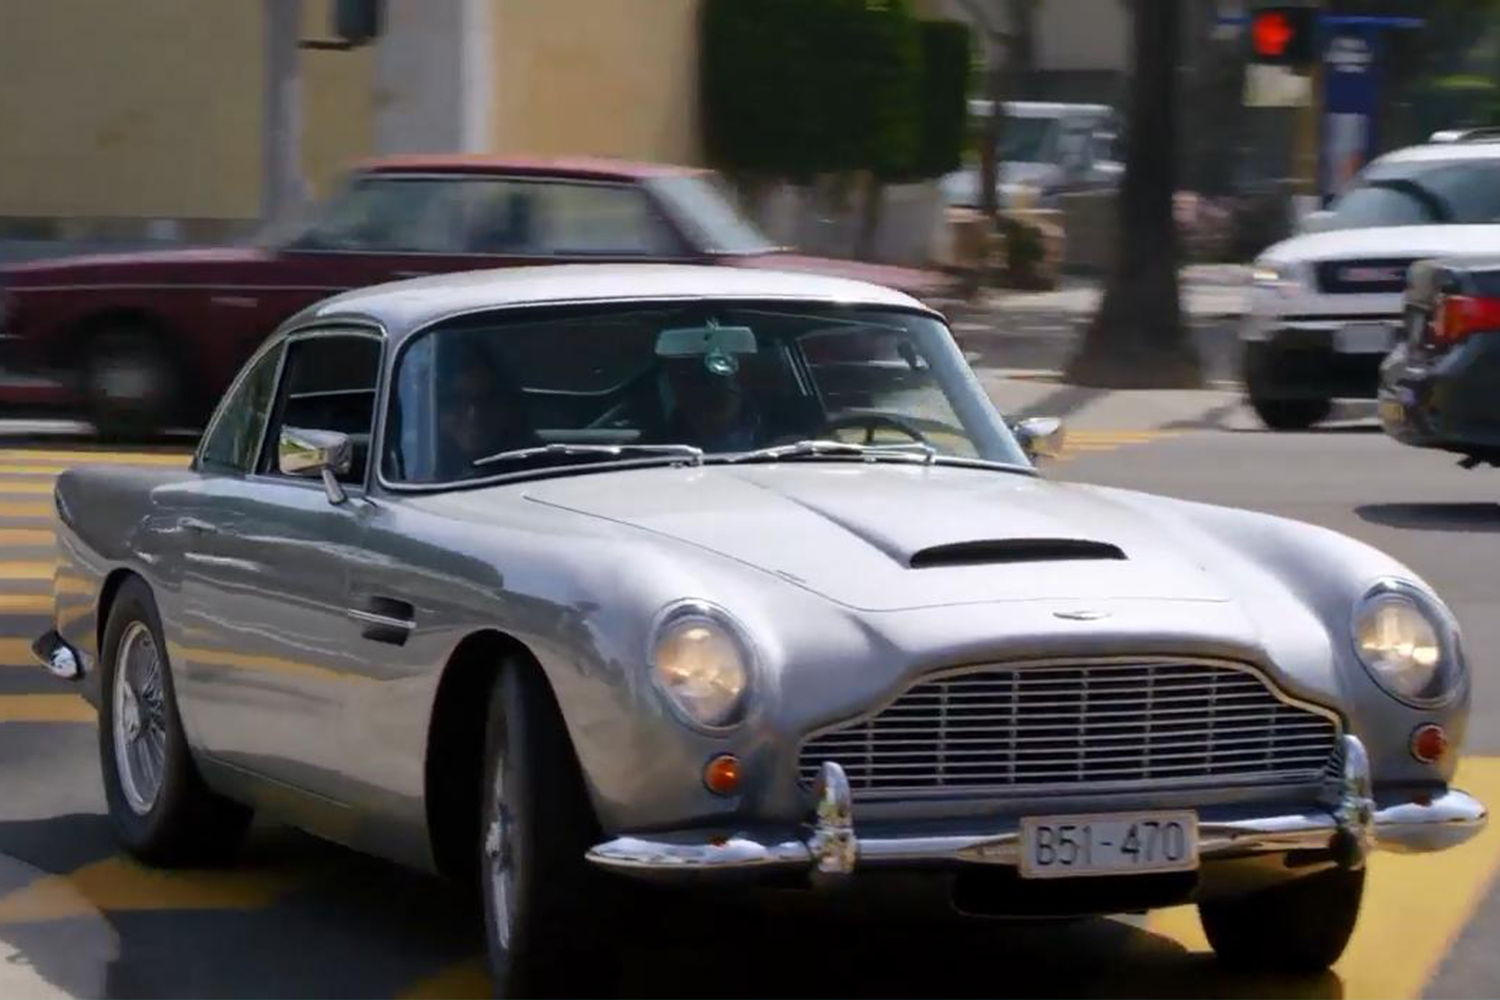 Best Comedians in Cars Getting Coffee James Bond Aston Martin DB5